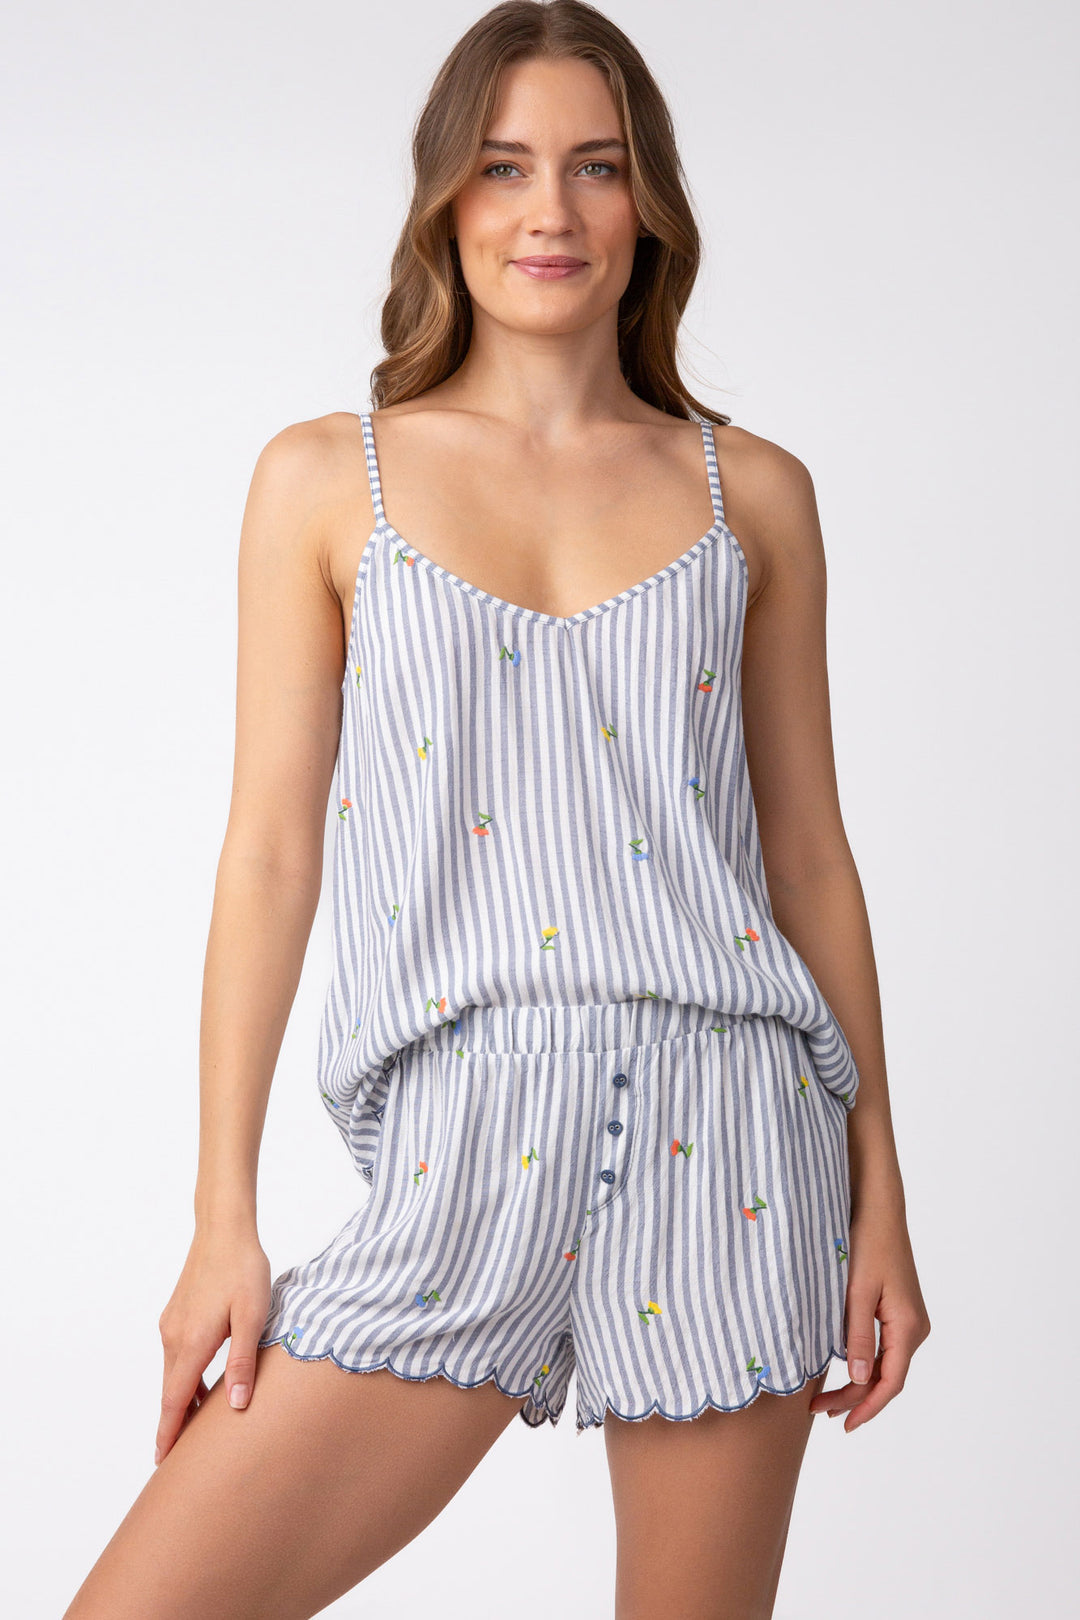 Sleep set cami top + short in yarn-dye striped woven with mini embroidered flowers.